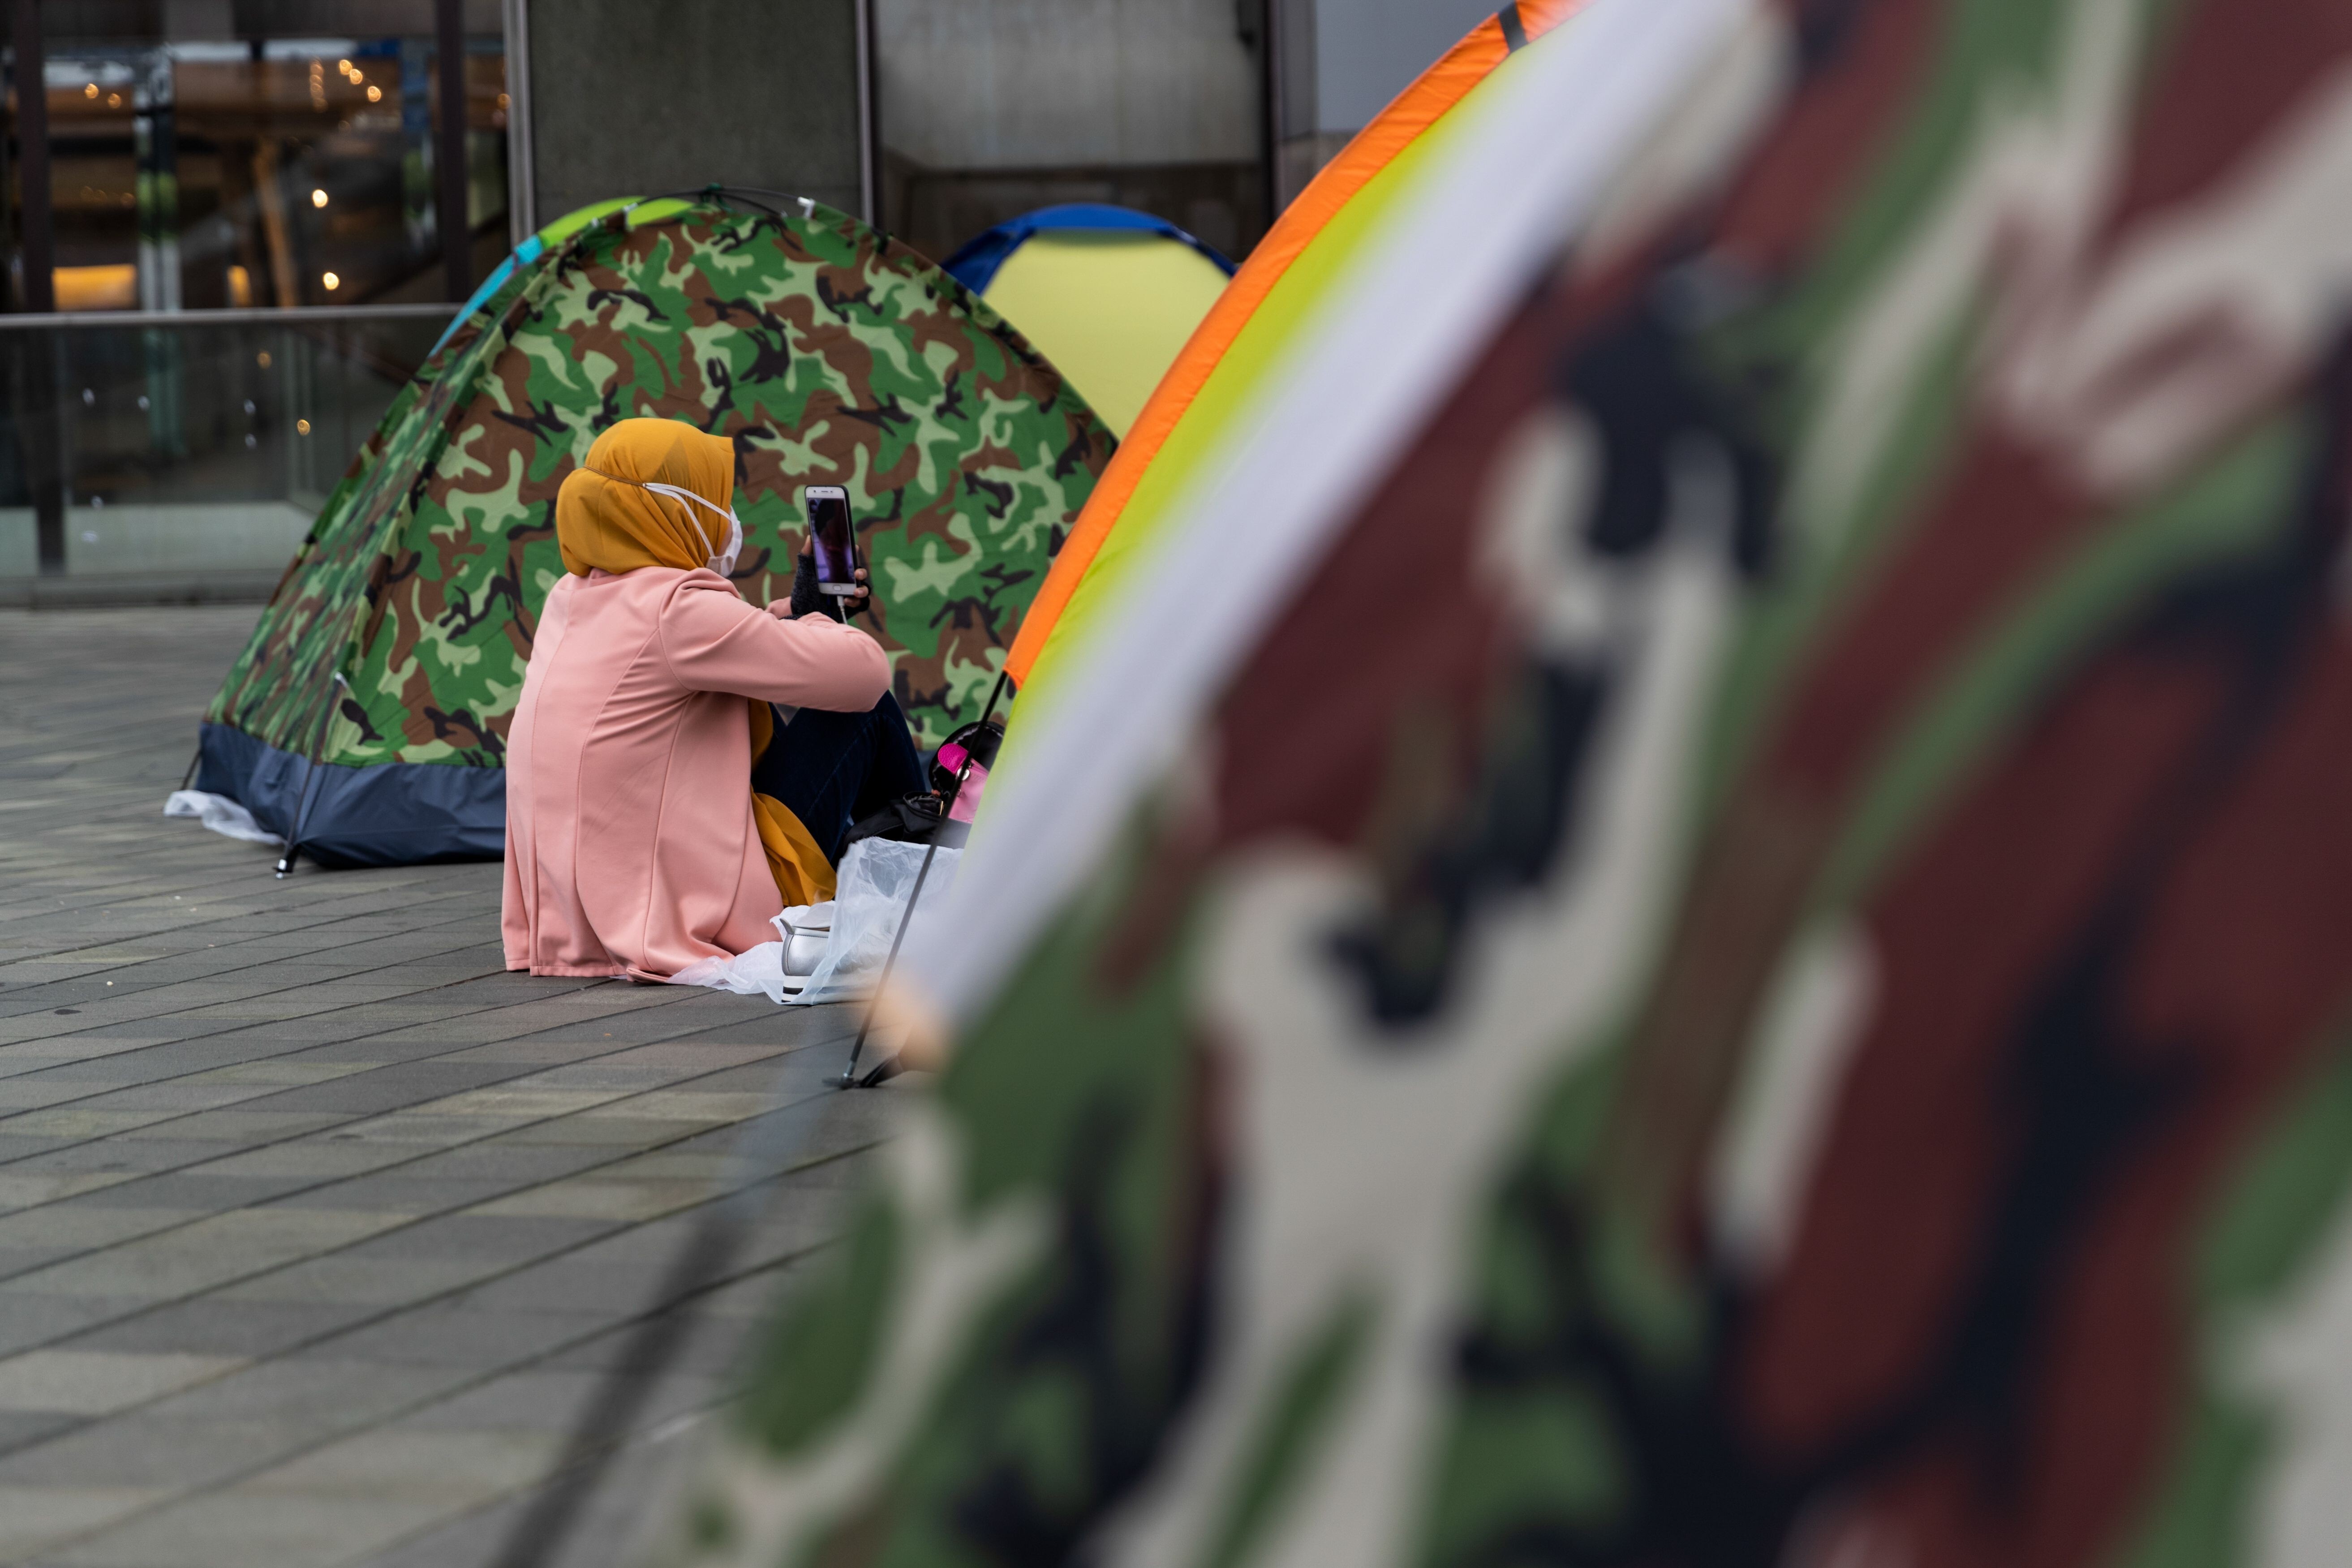 A domestic helper wearing a face mask spends time with other workers on their day off in Hong Kong on April 5. In an economic downturn, many domestic workers may lose their job simply because their employers can no longer afford to pay for domestic help. Photo: AFP